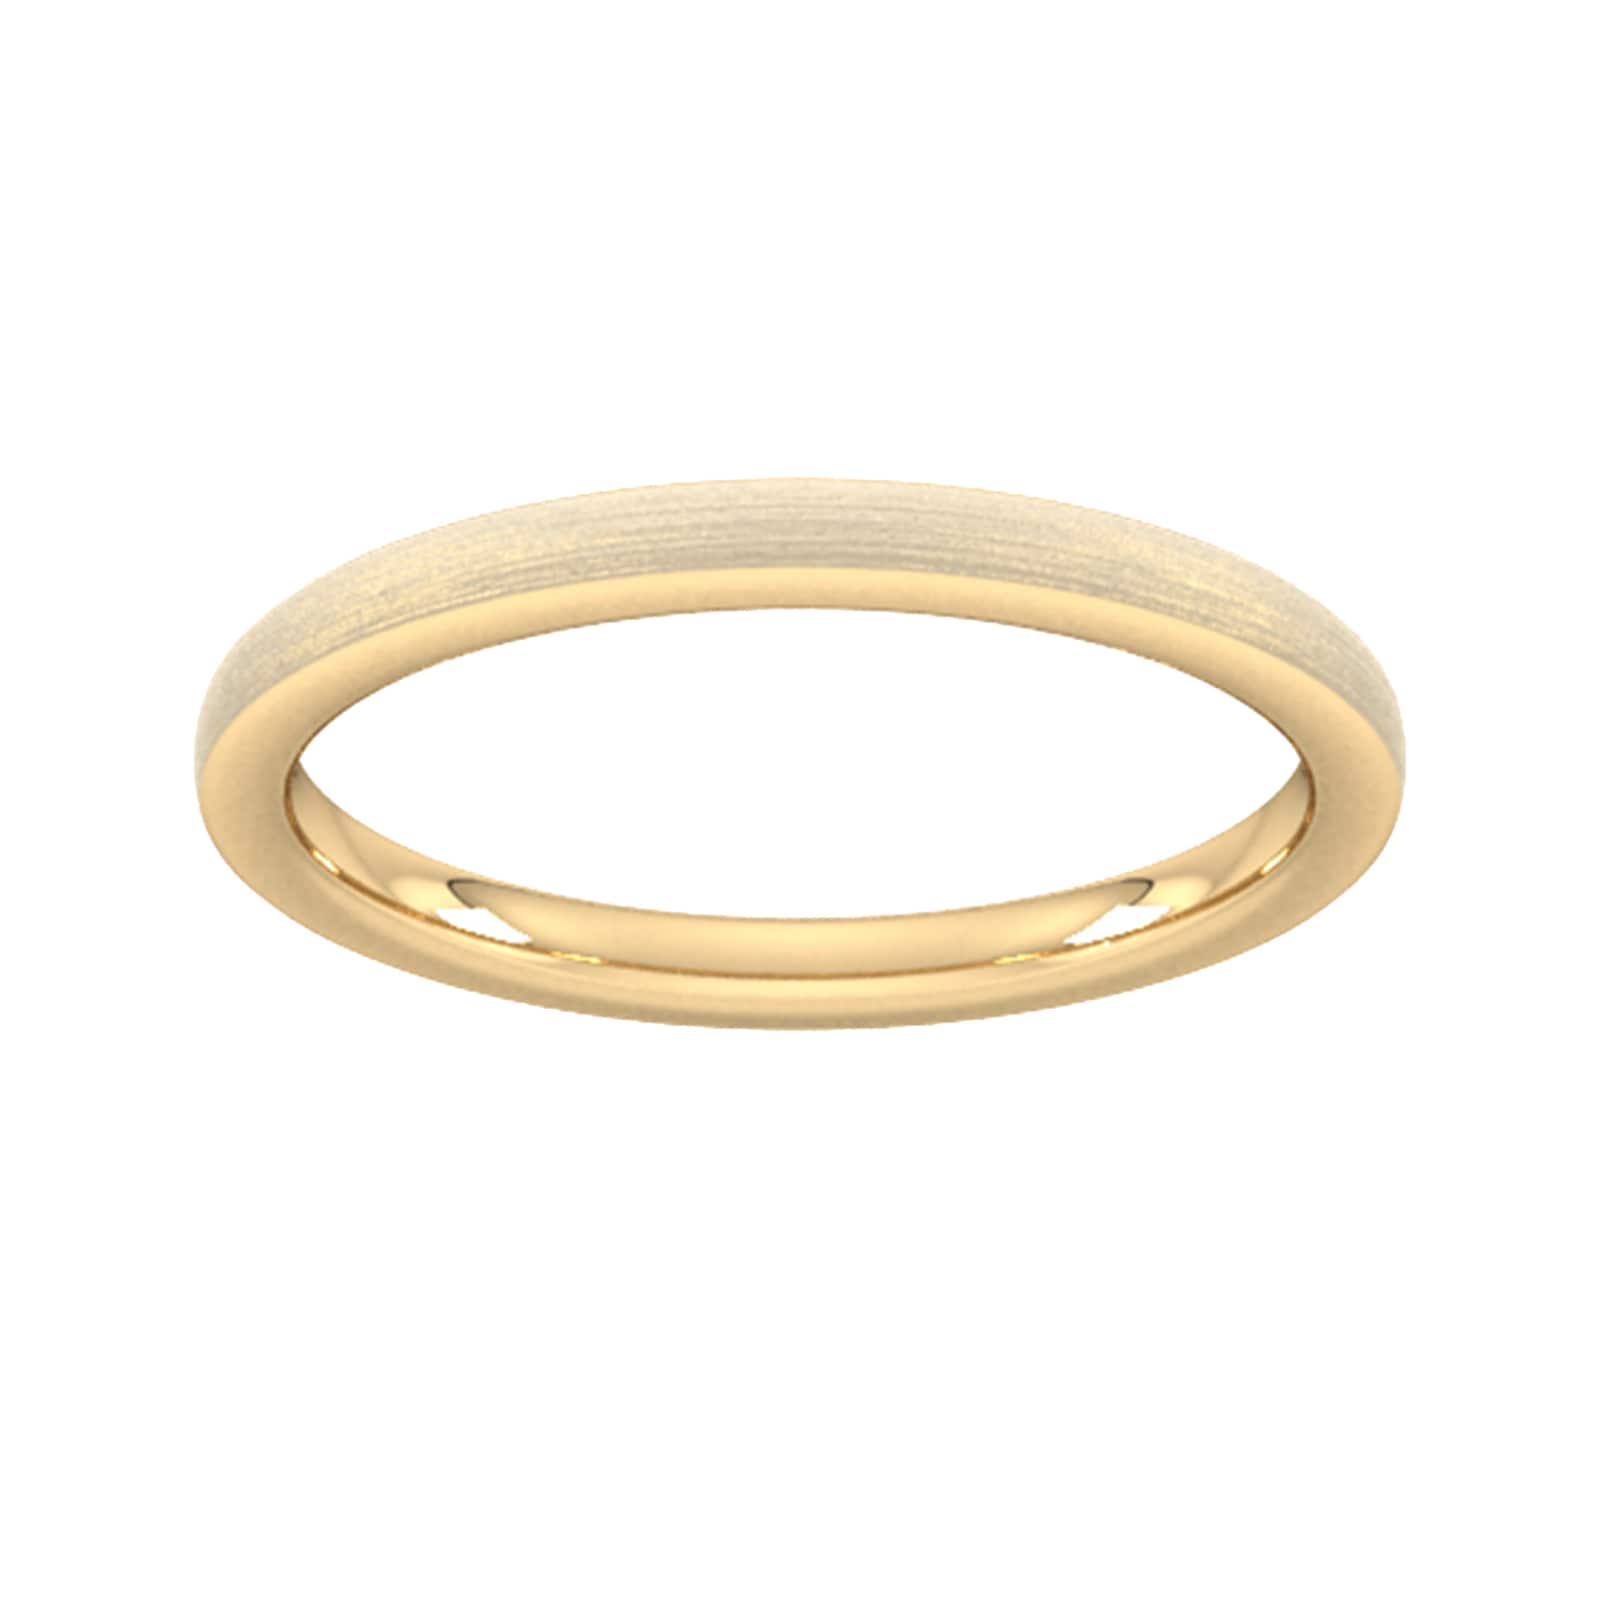 2mm Slight Court Standard Polished Chamfered Edges With Matt Centre Wedding Ring In 18 Carat Yellow Gold - Ring Size V